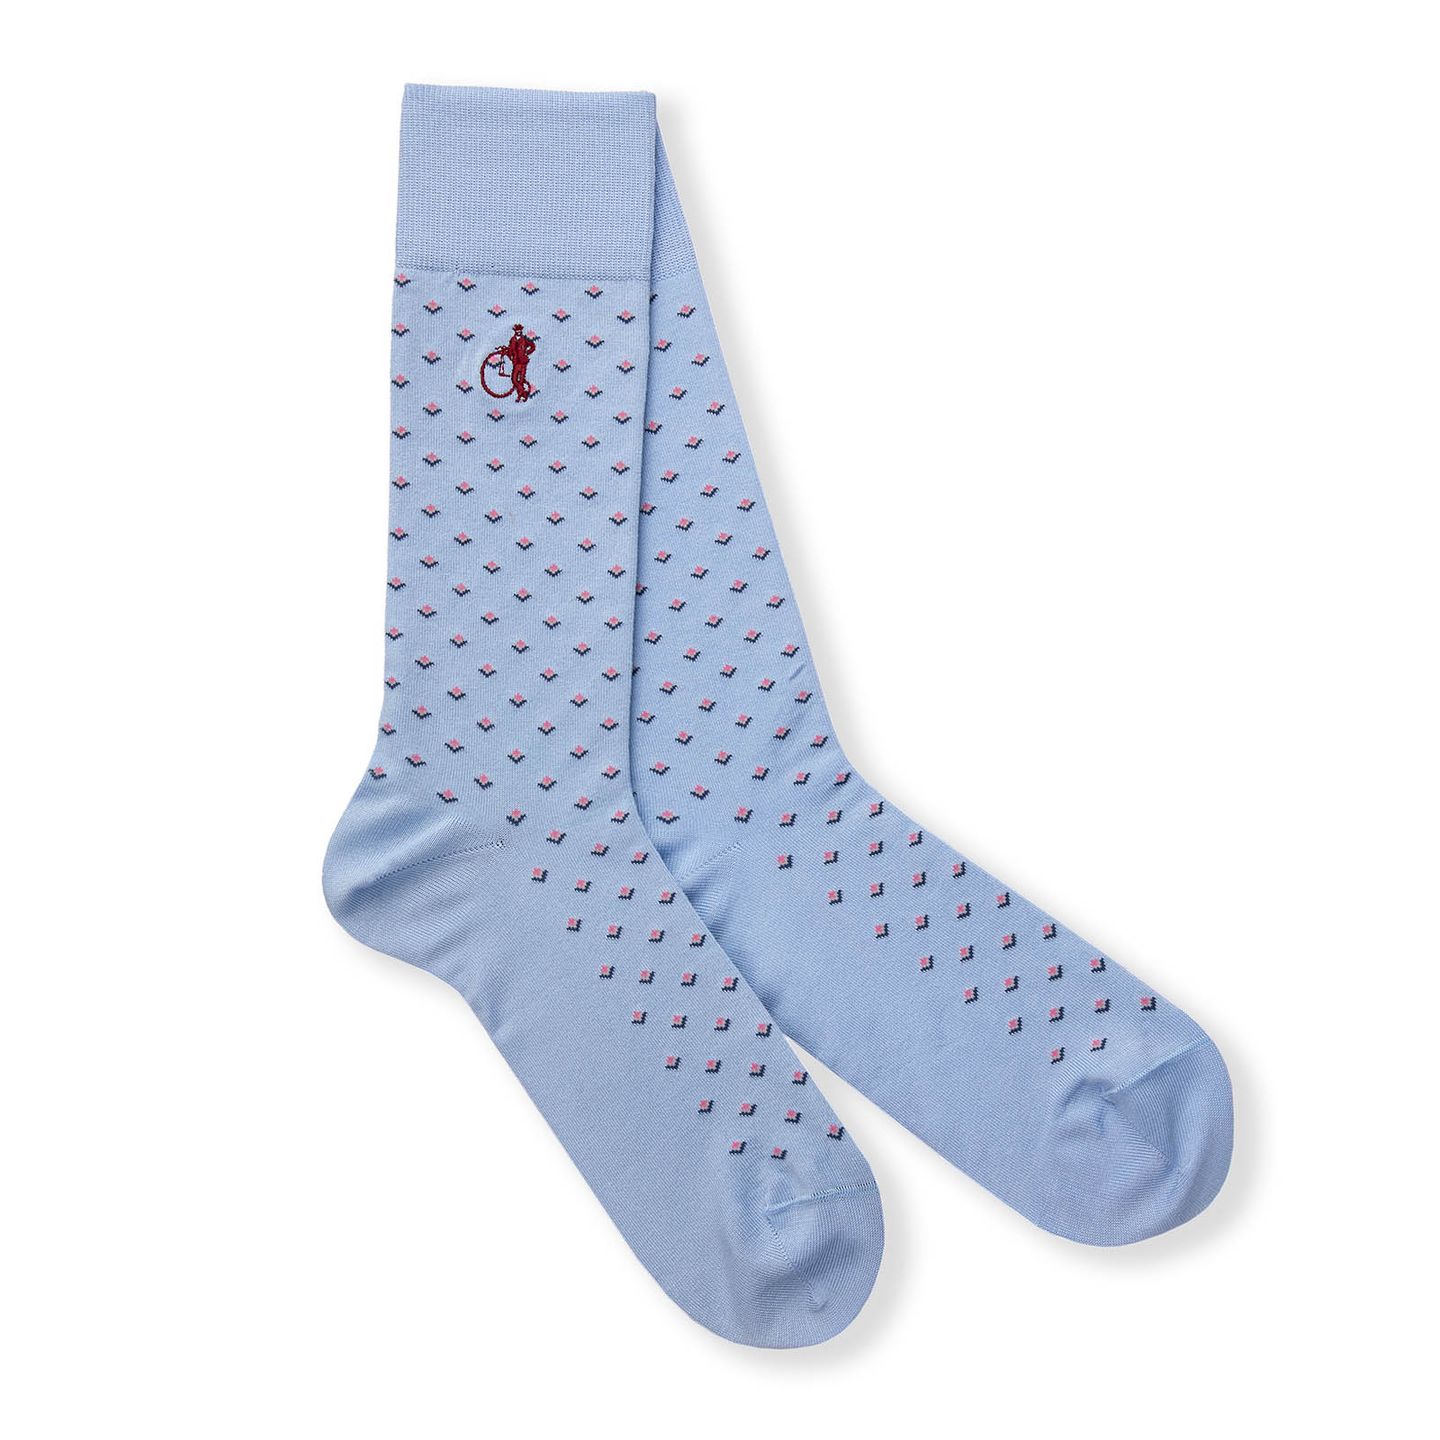 Ilaria light blue and dark blue and red diamond patterned socks